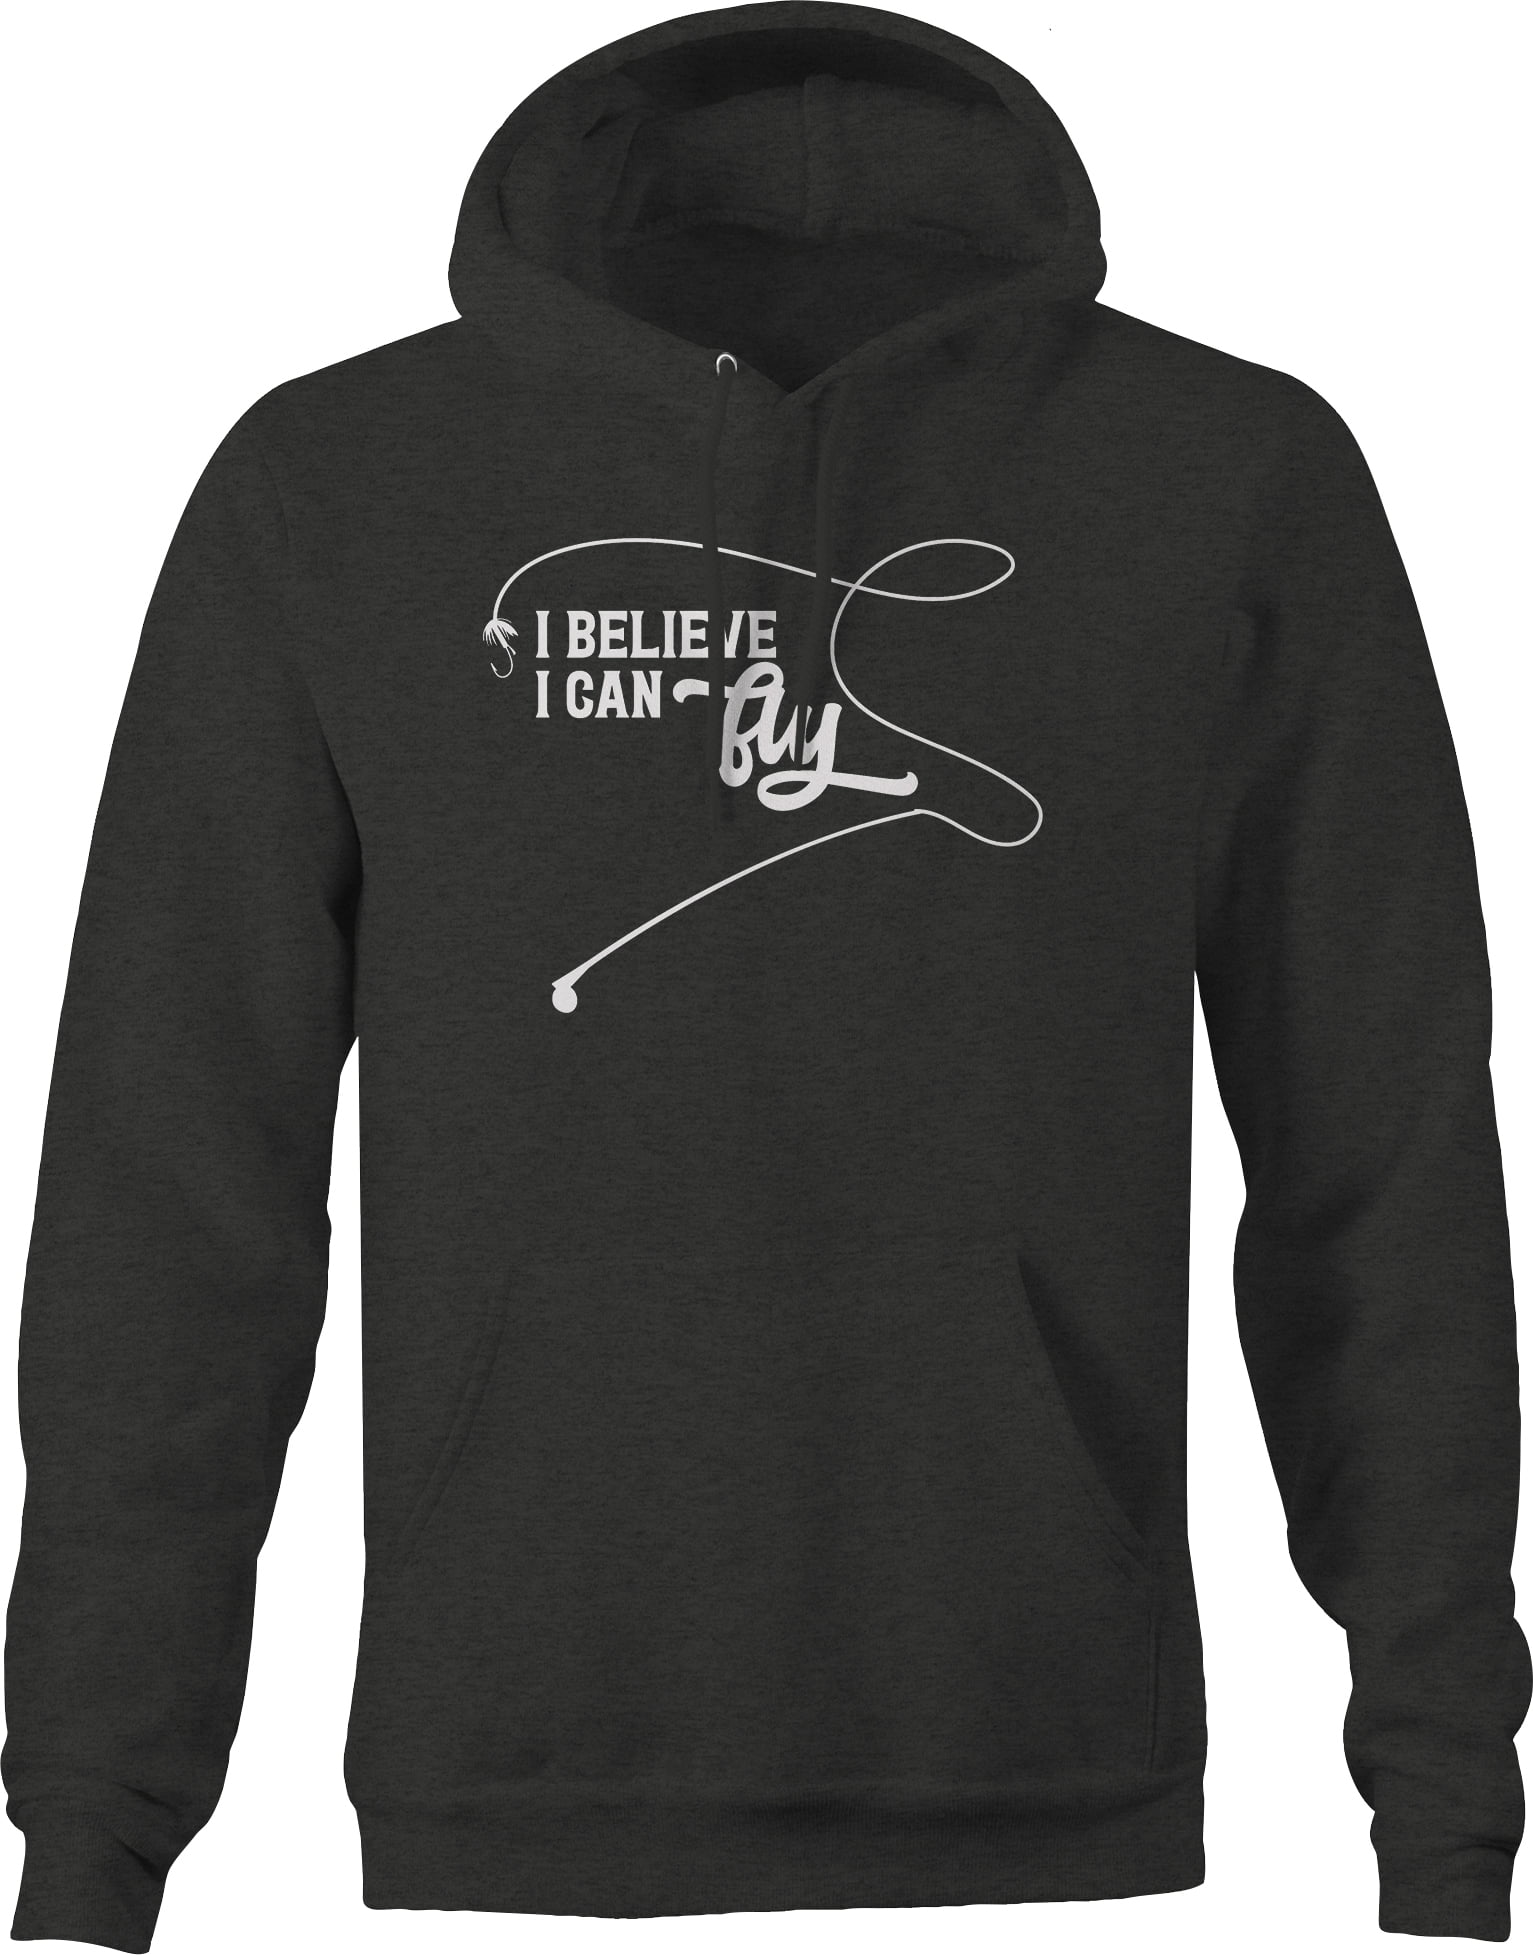 I Believe I can Fly Fishing Hoodie for Big Men 3XL Dark Gray